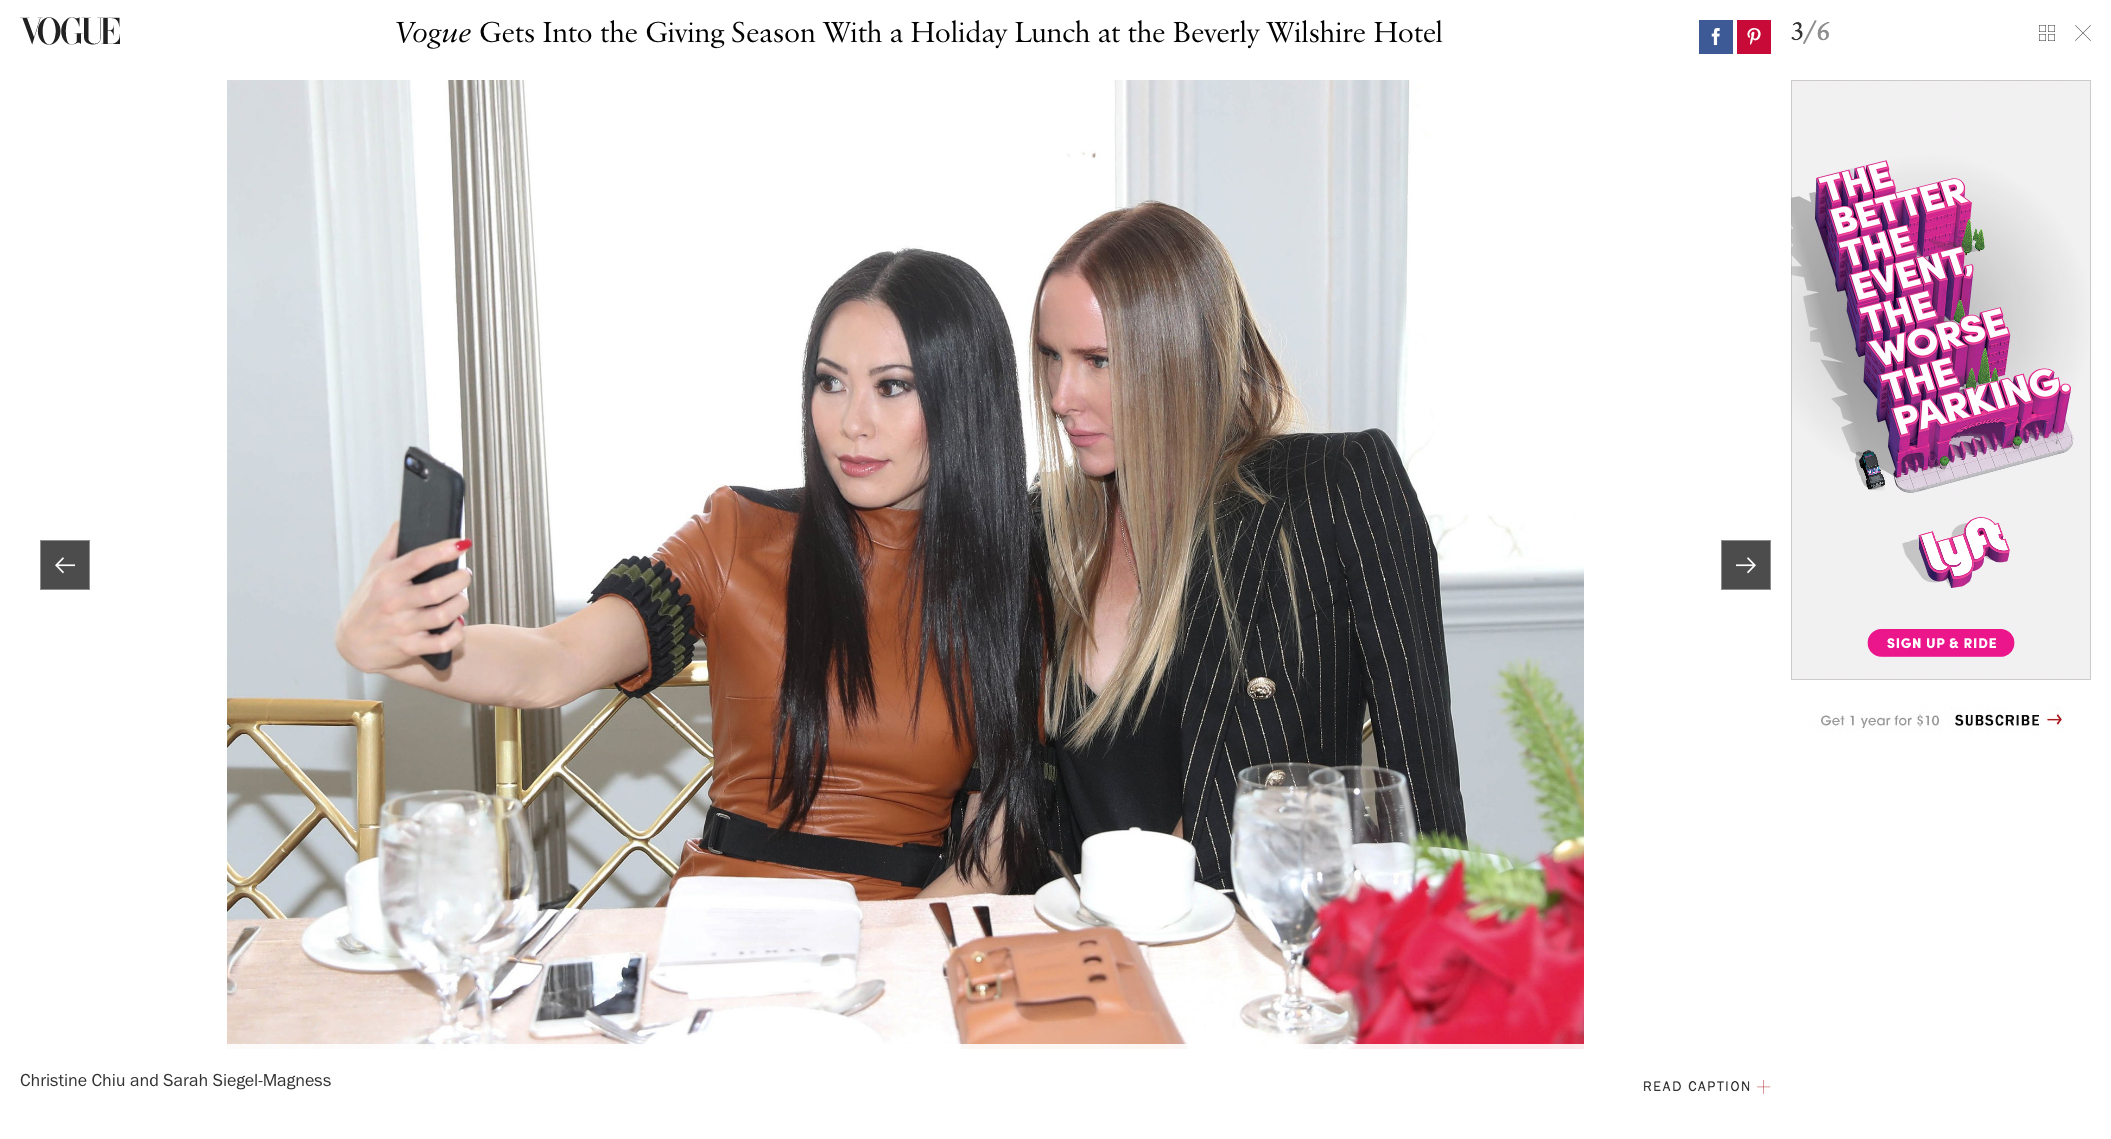 Article: Vogue.com – Vogue Gets Into the Giving Season With a Holiday Lunch at the Beverly Wilshire Hotel